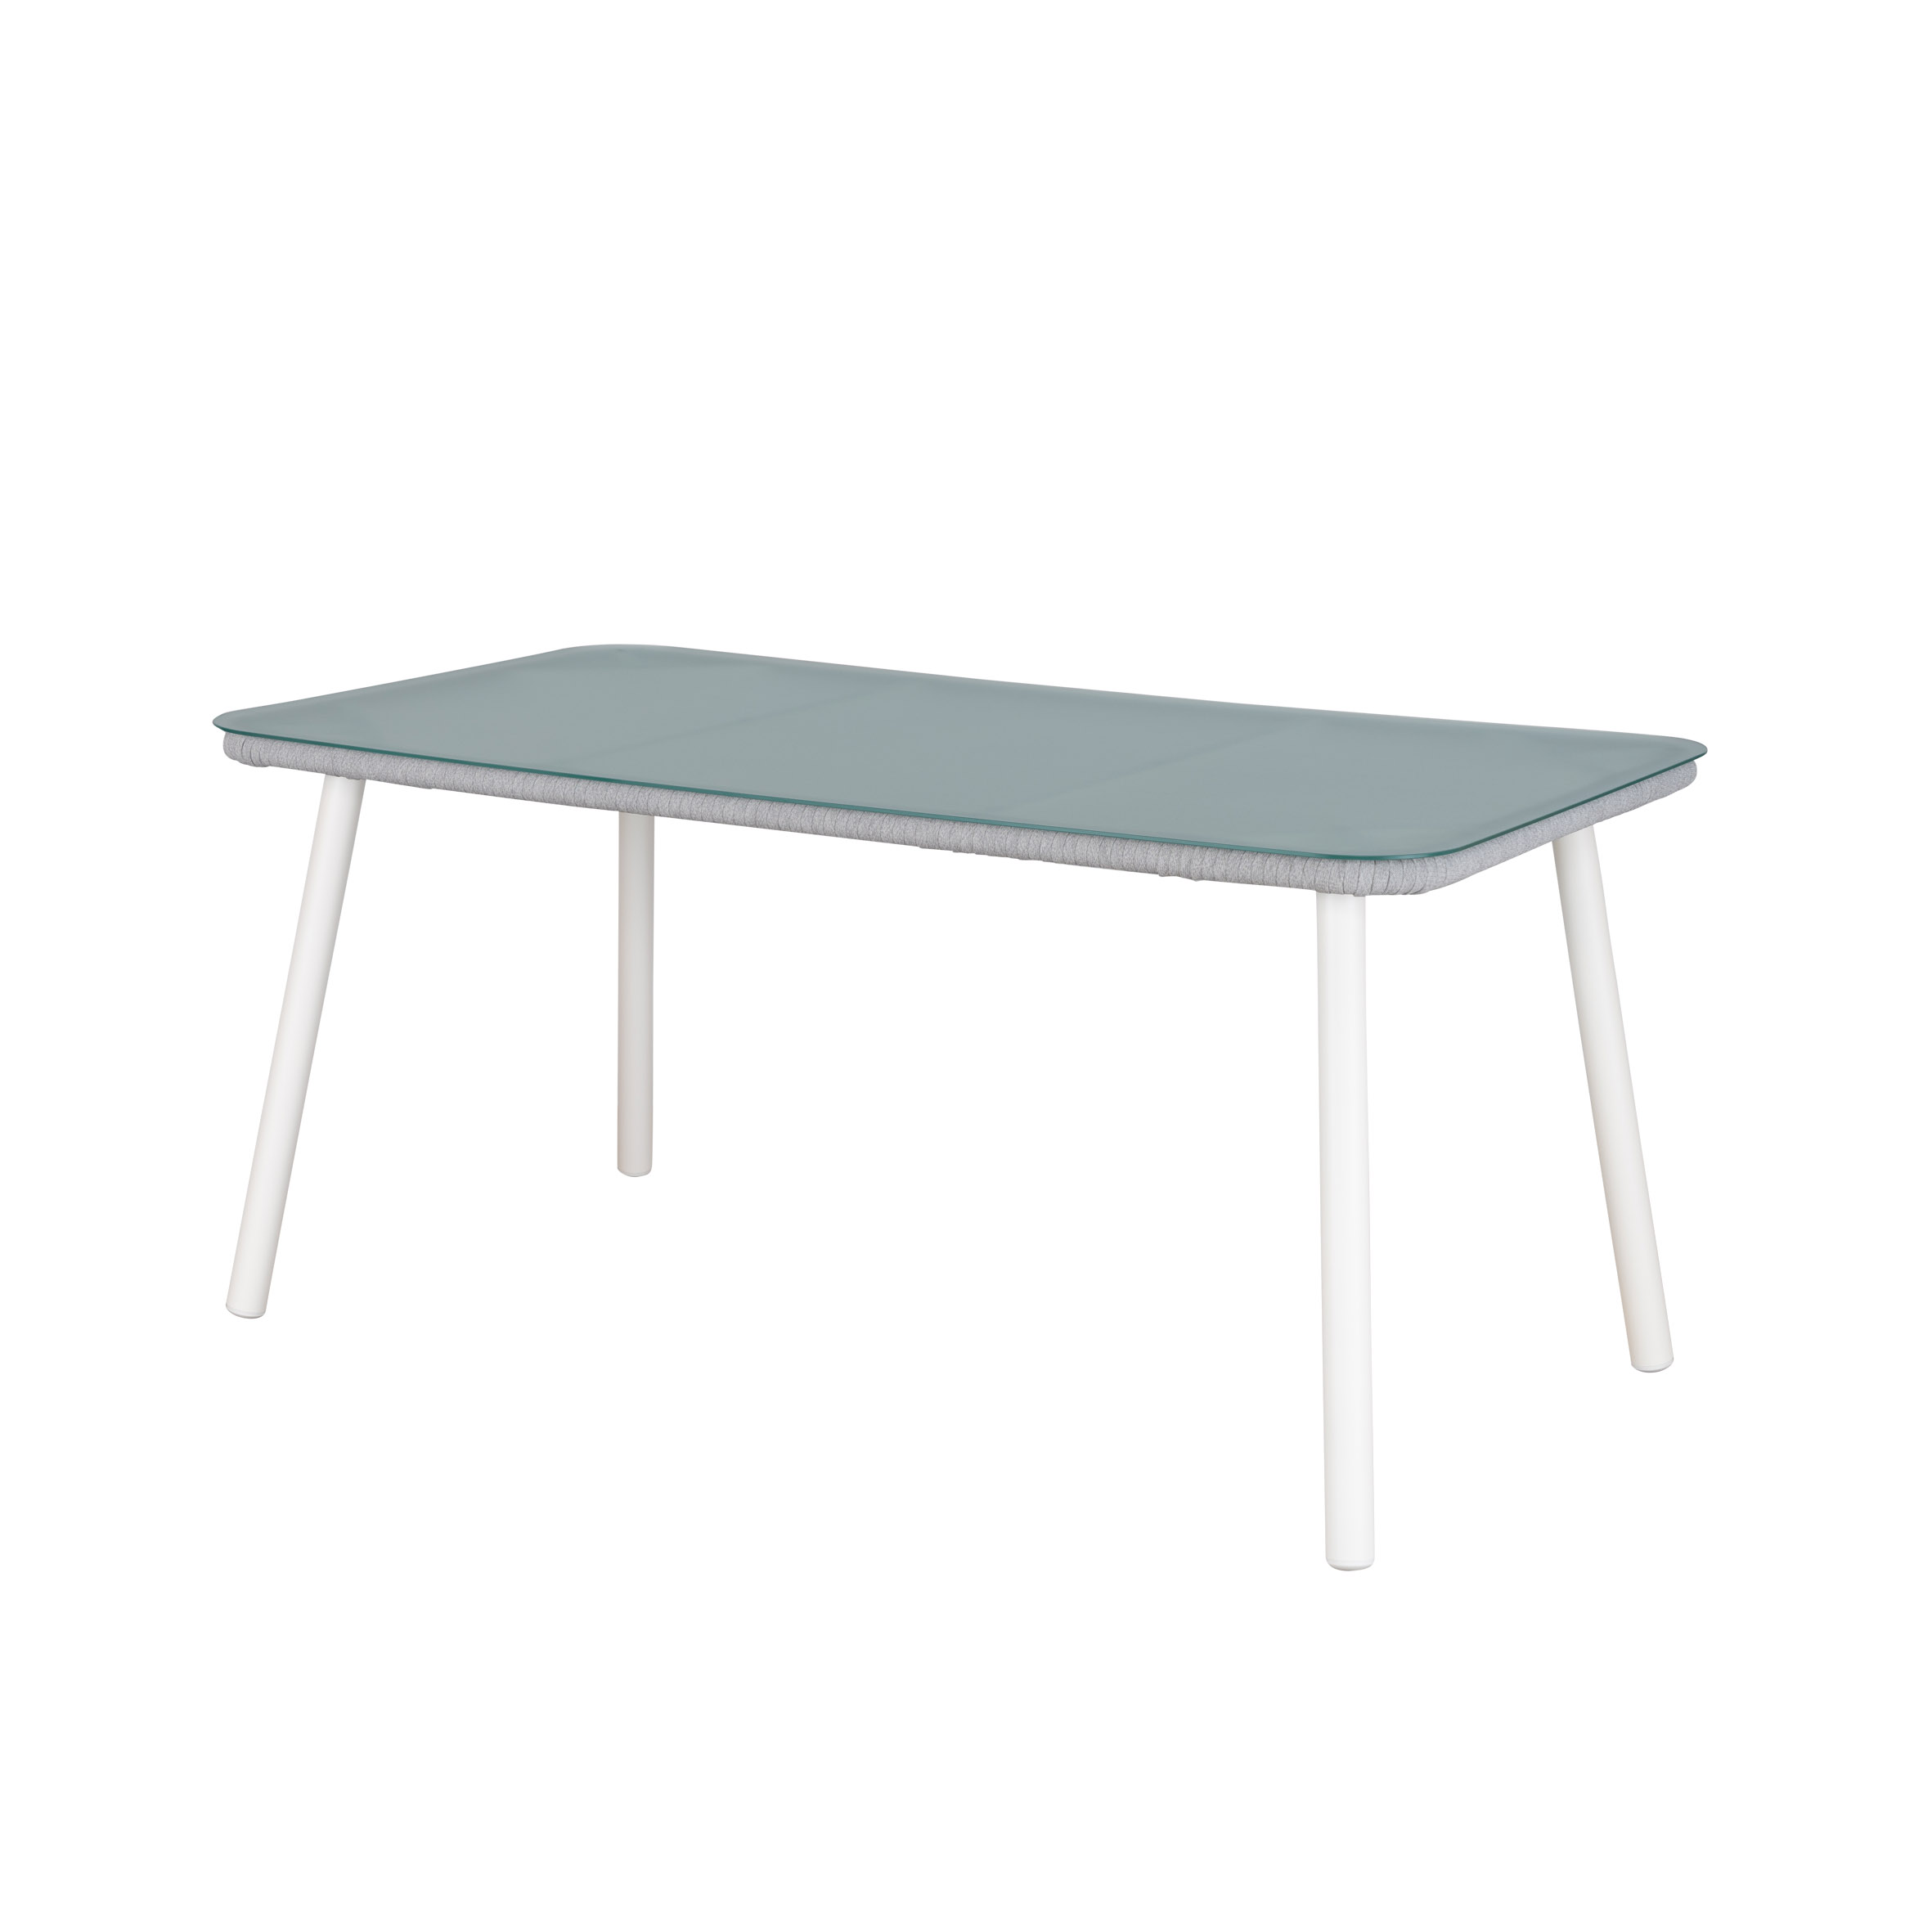 Lincoln rope rectangle table S6